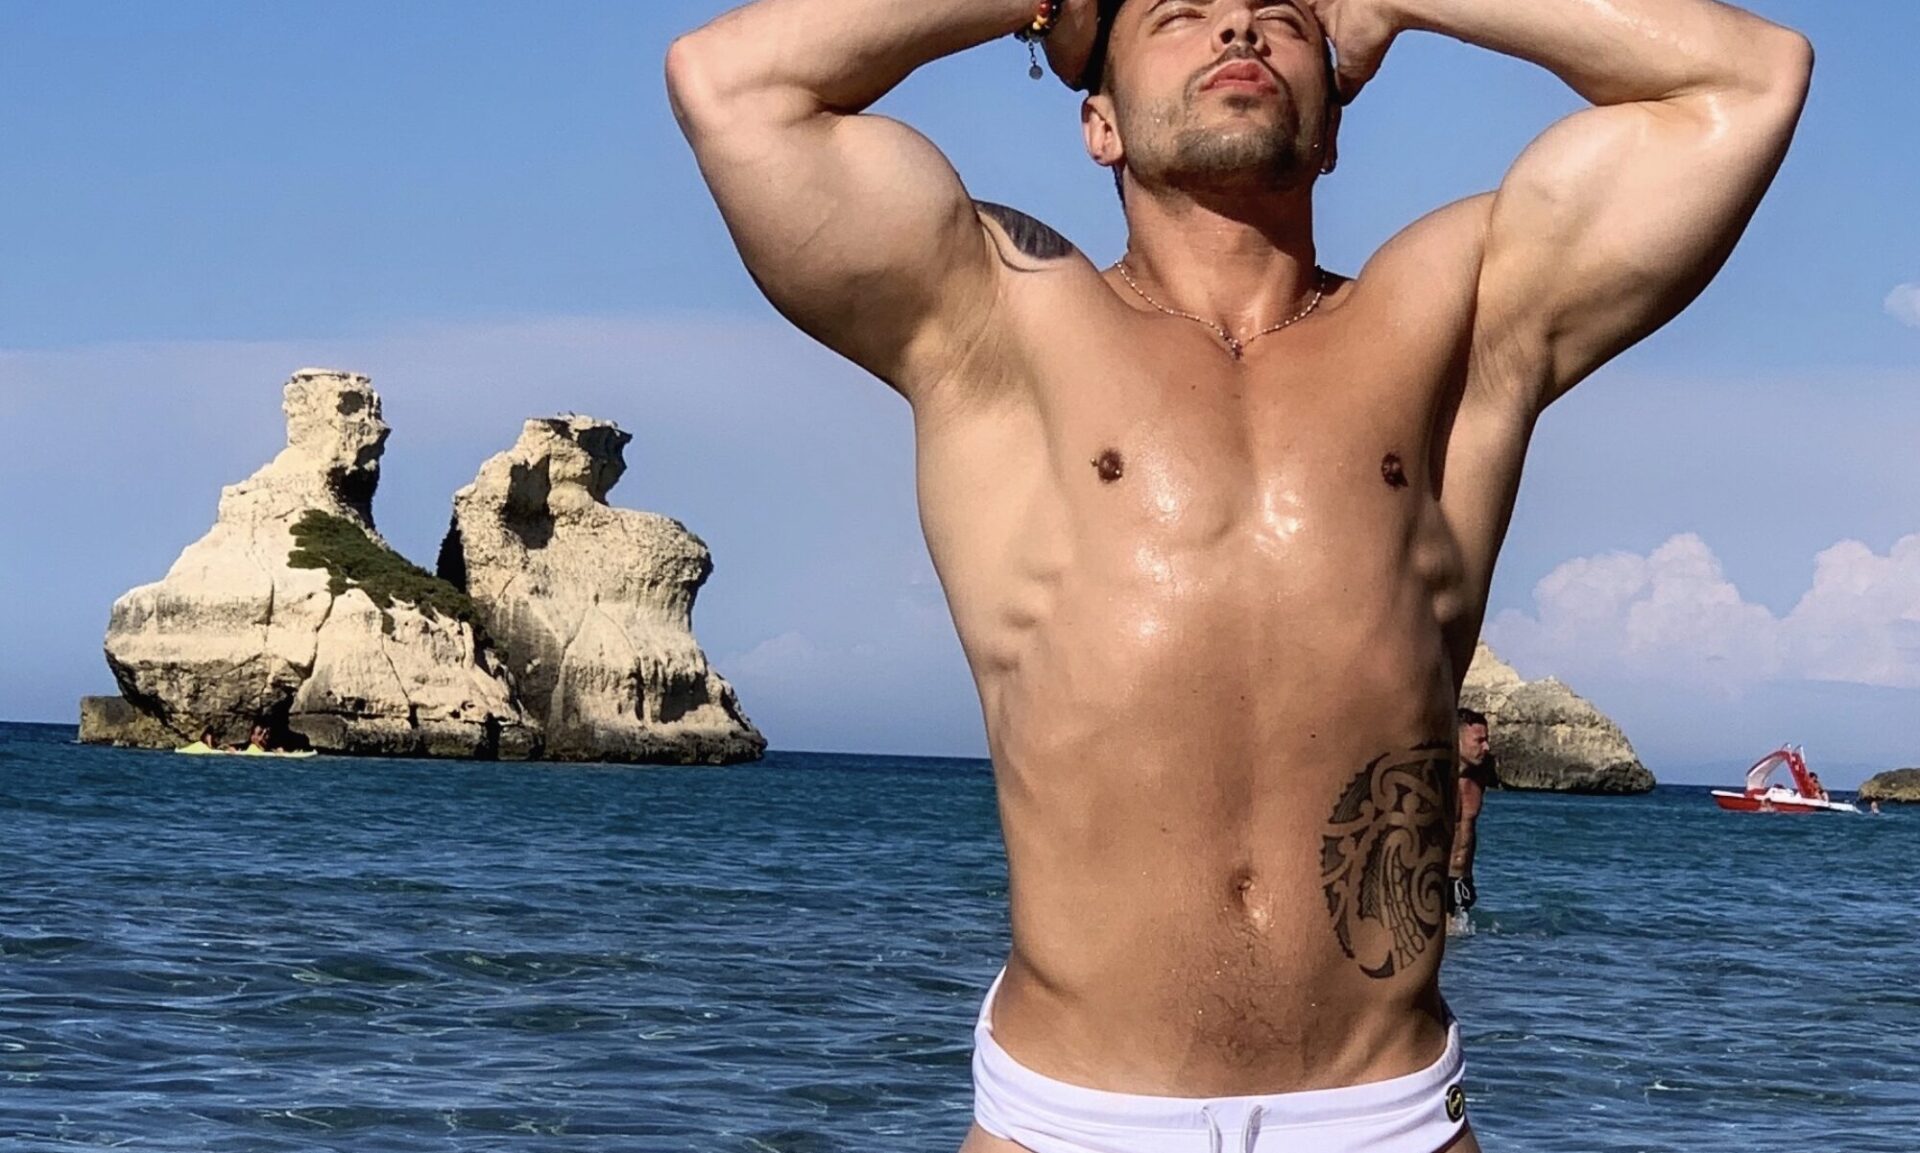 gay Puglia - Italy’s top gay summer destination for LGBT travellers | photo the Puglia Guys for the Big Gay Podcast from Puglia gay guides to Puglia’s best gay beaches, bars, clubs and accommodation and city guides.